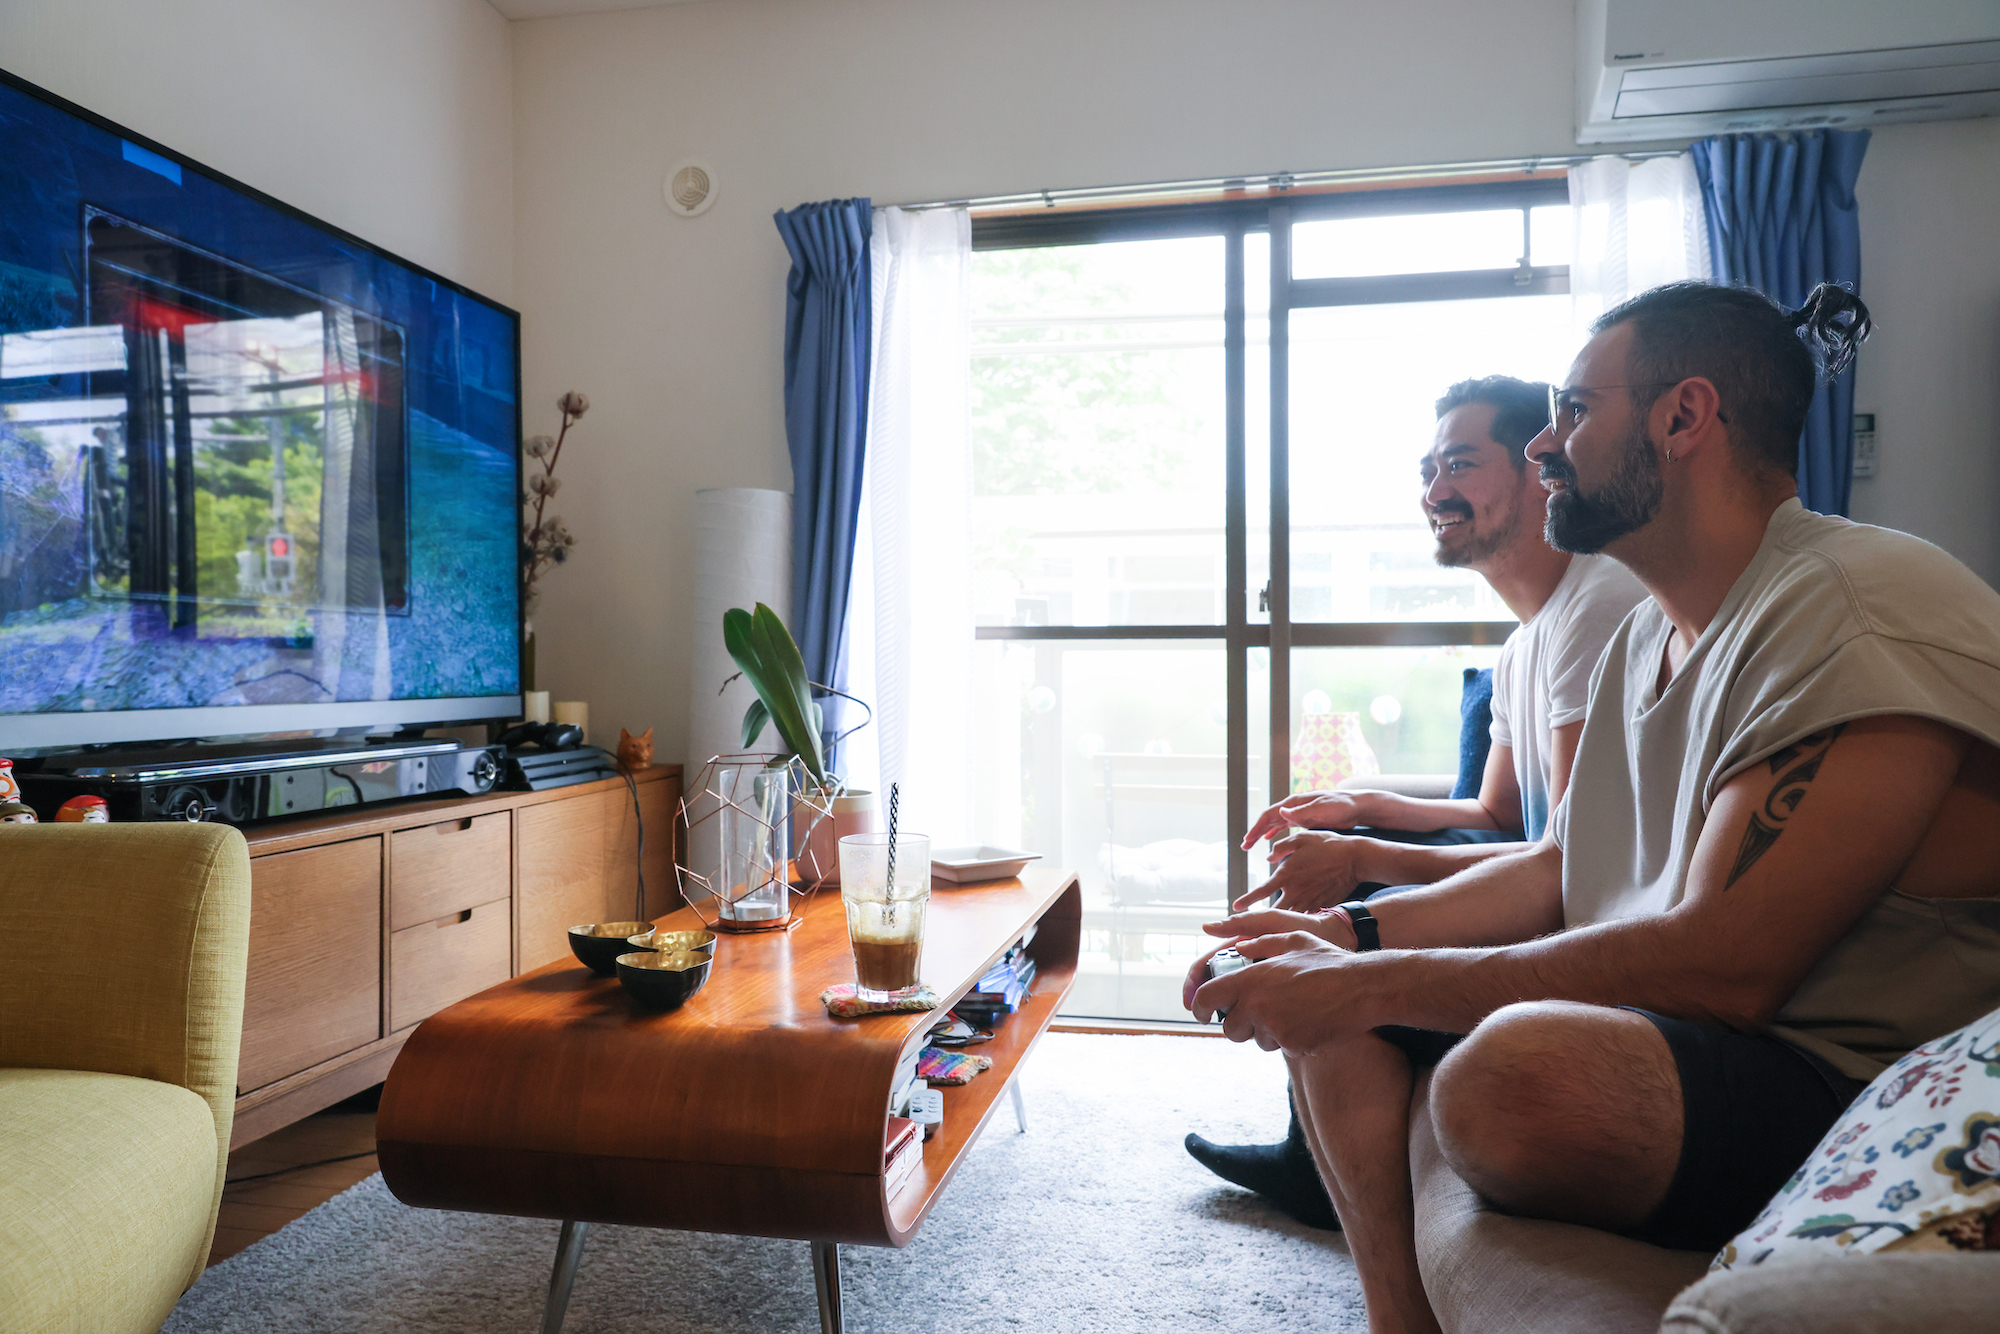 Two men playing video games